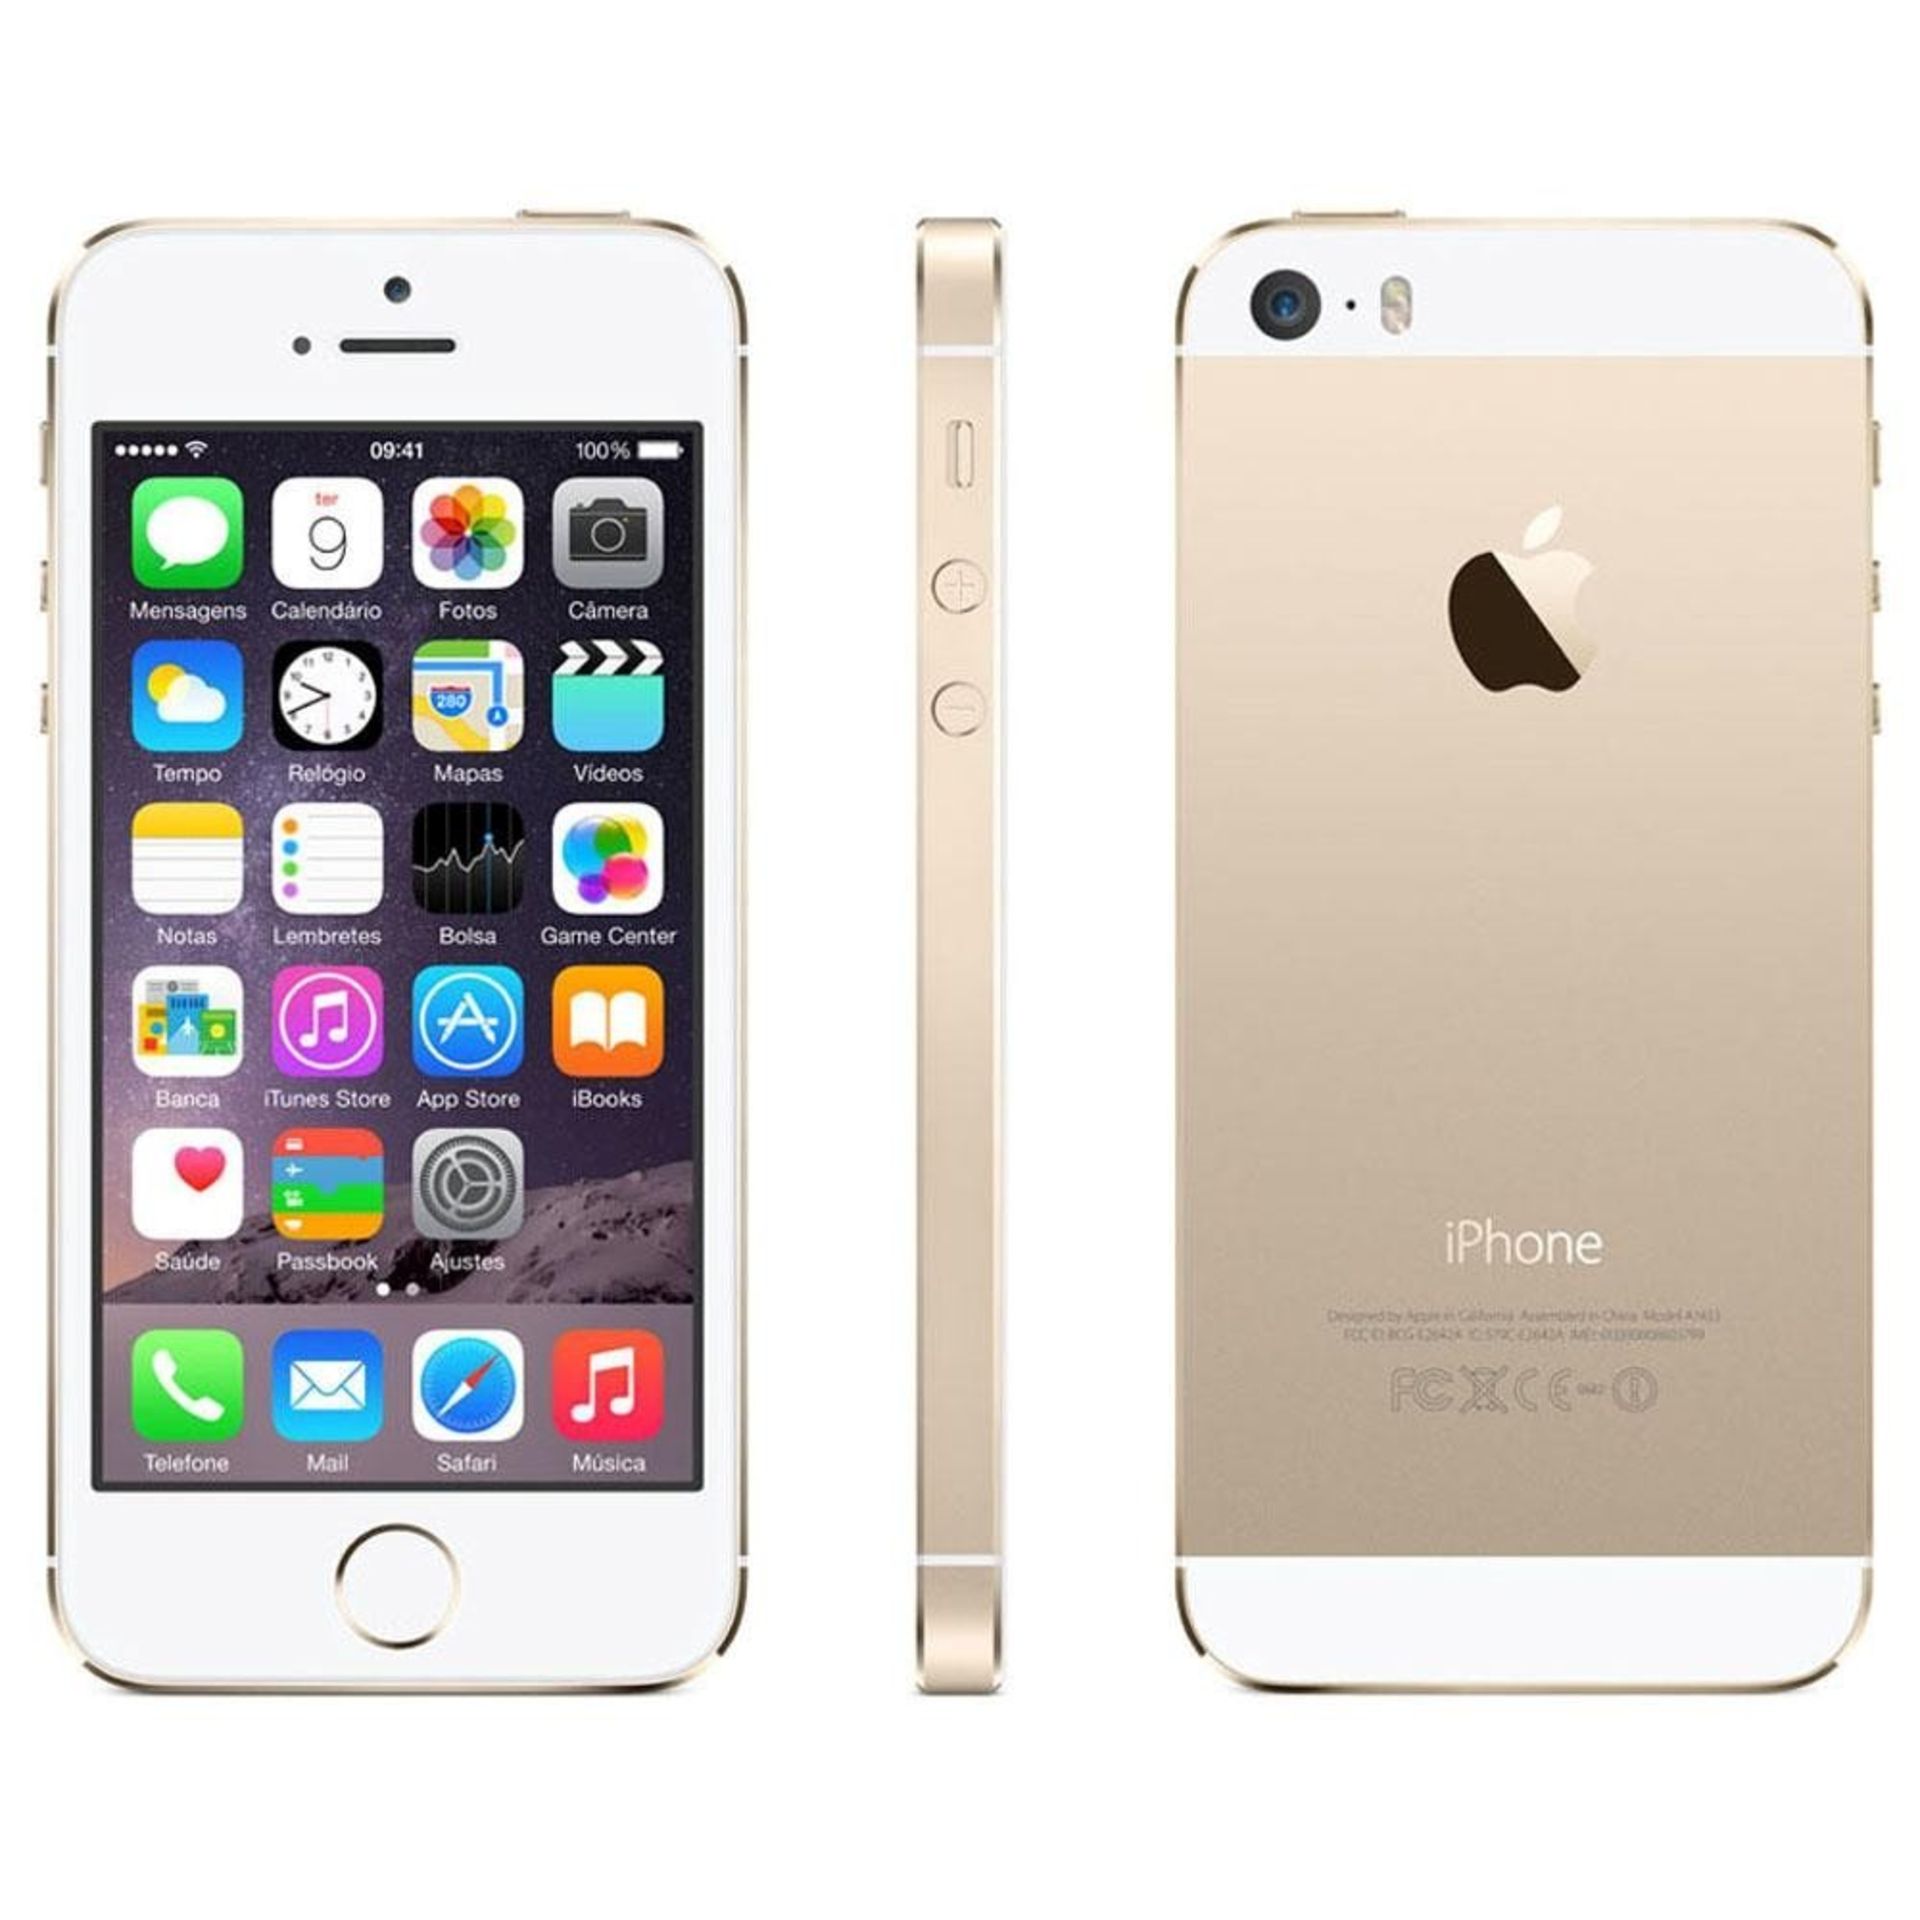 Grade A Apple iPhone 5S Unlocked 16GB - Gold - Touch ID - Apple Box With Some Accessories - Item